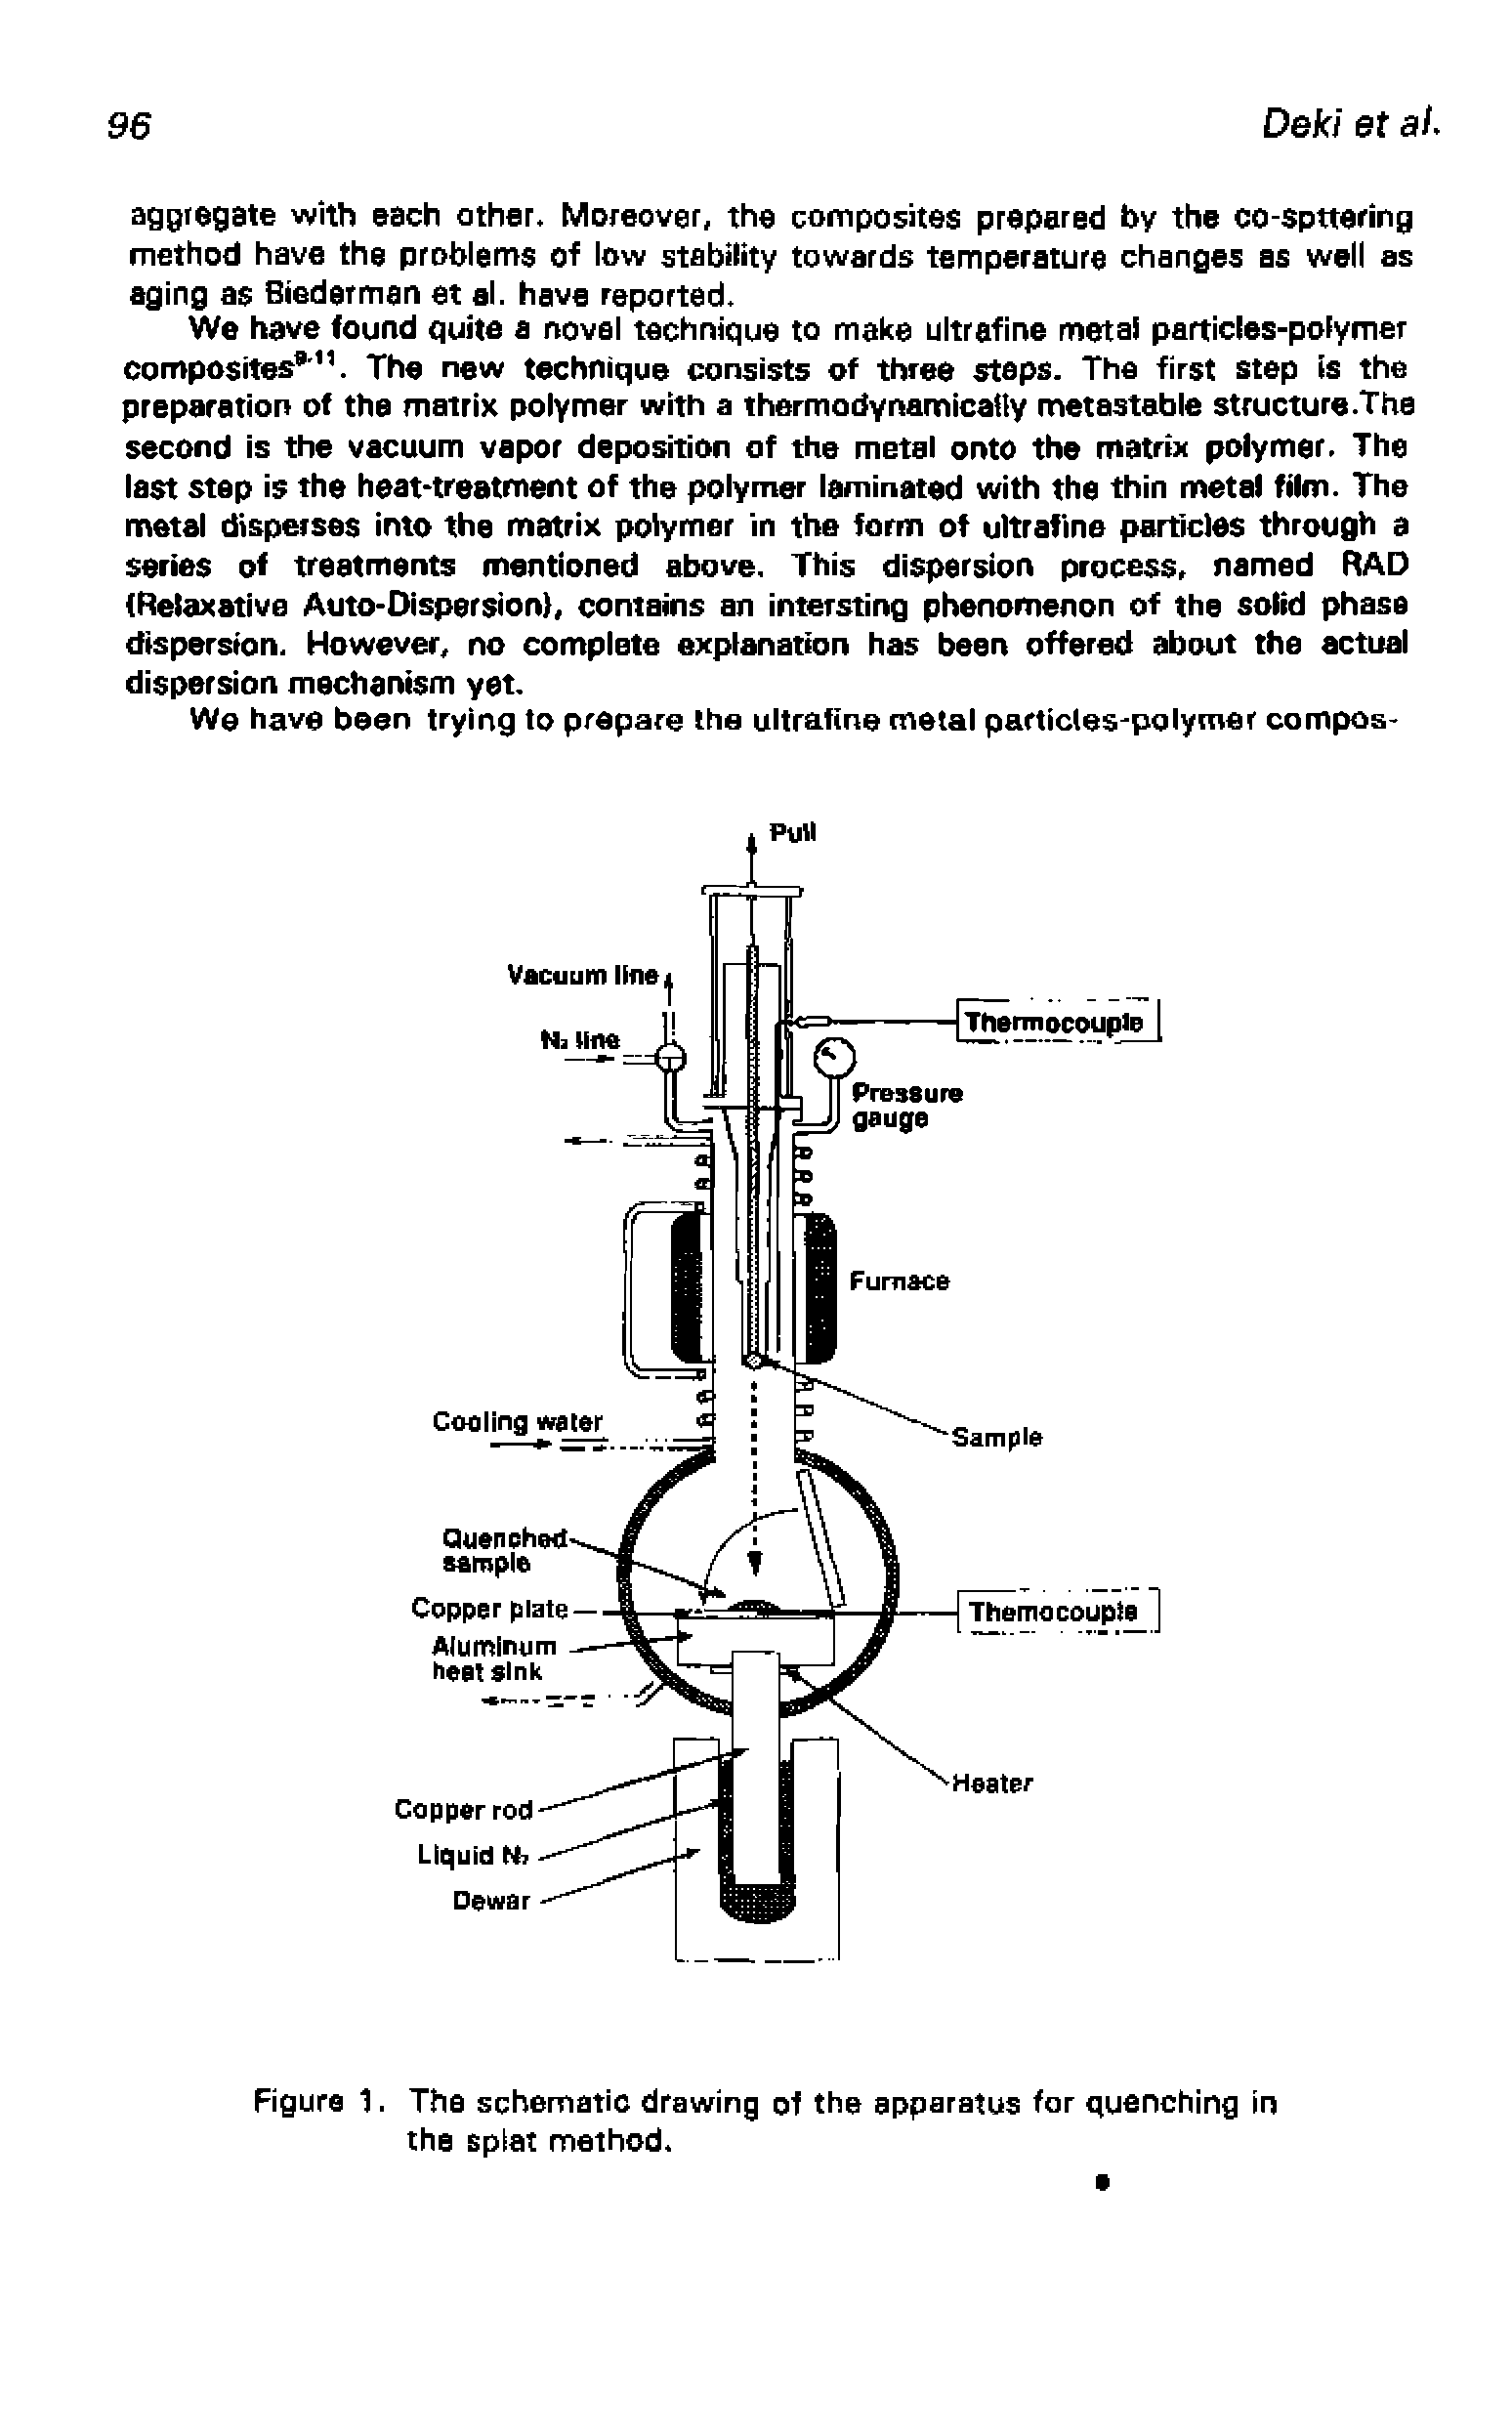 Figure 1. The schematic drawing of the apparatus for quenching in the splat method.